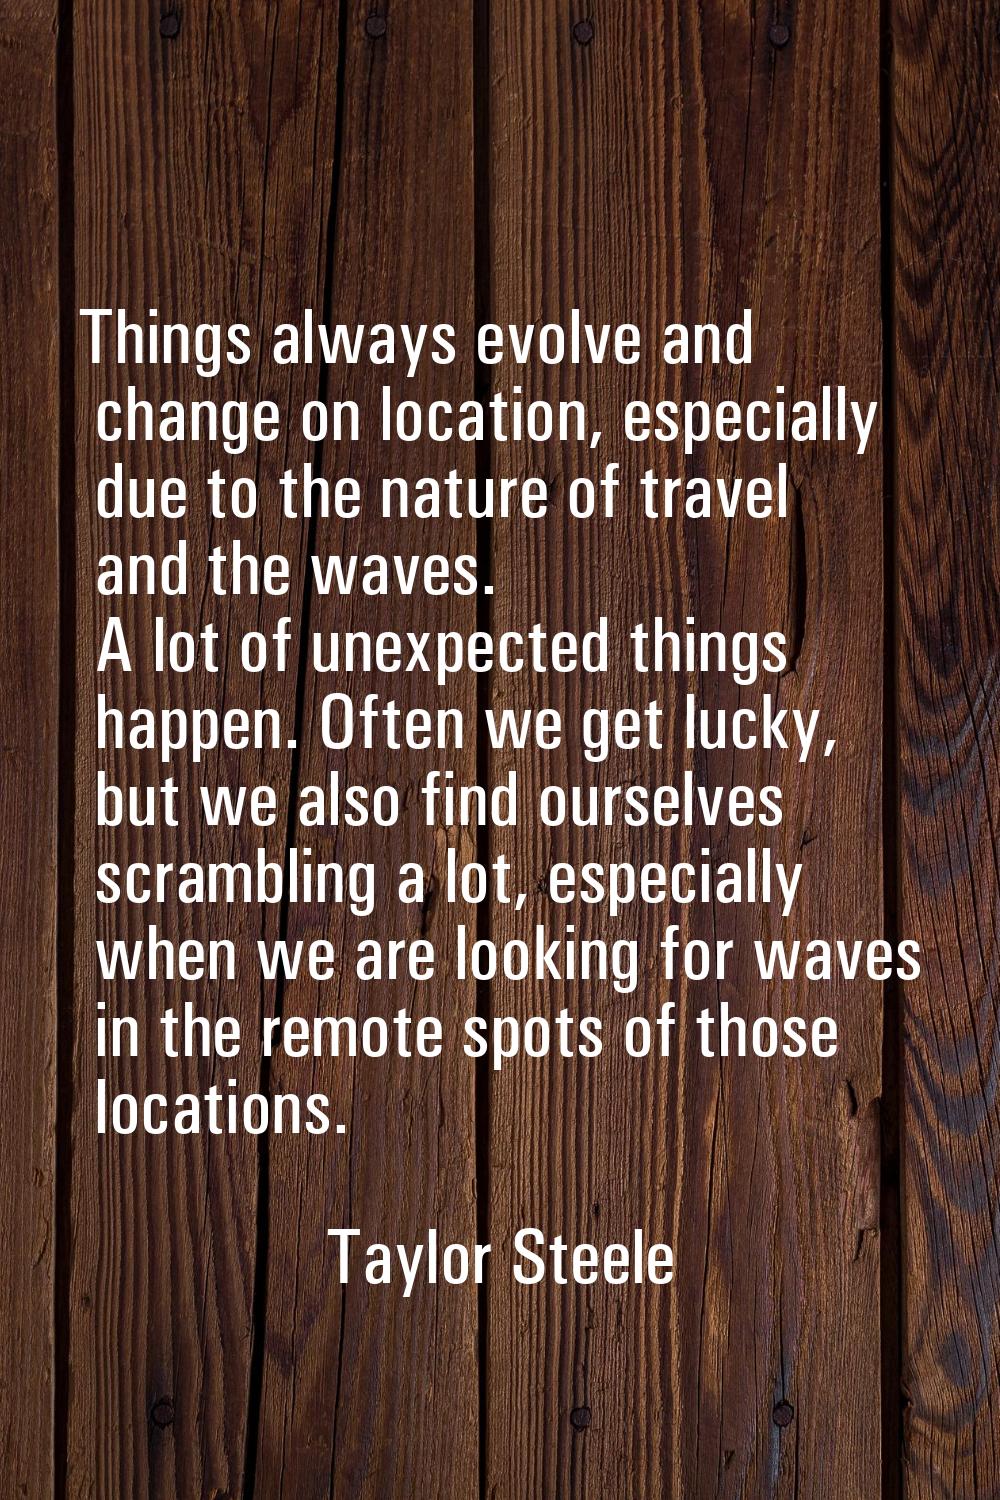 Things always evolve and change on location, especially due to the nature of travel and the waves. 